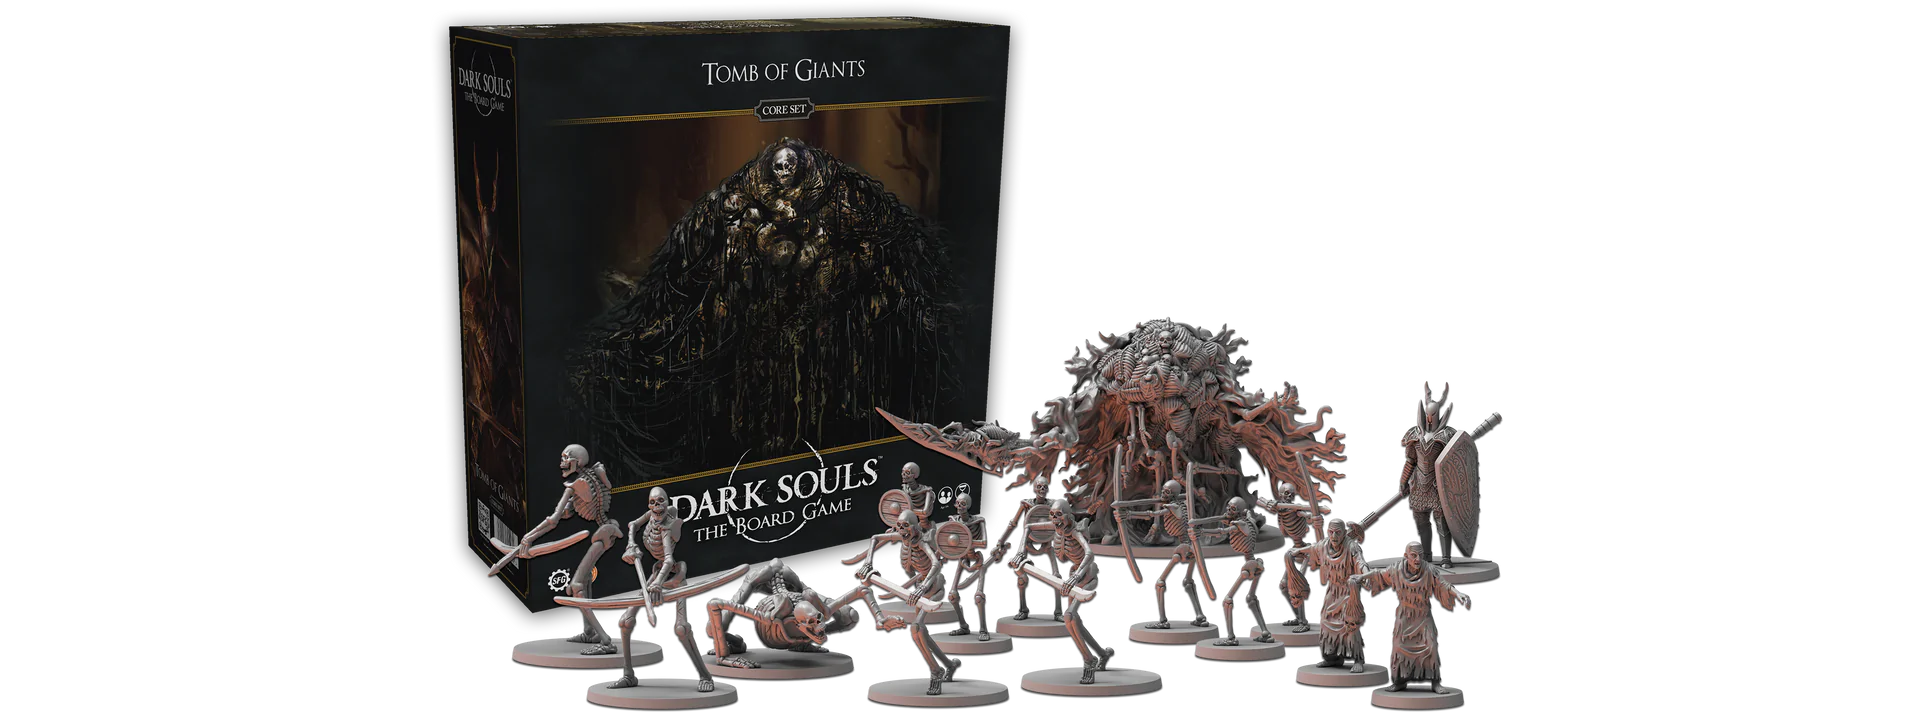 DARK SOULS™: The Board Game, Tomb of Giants with minis